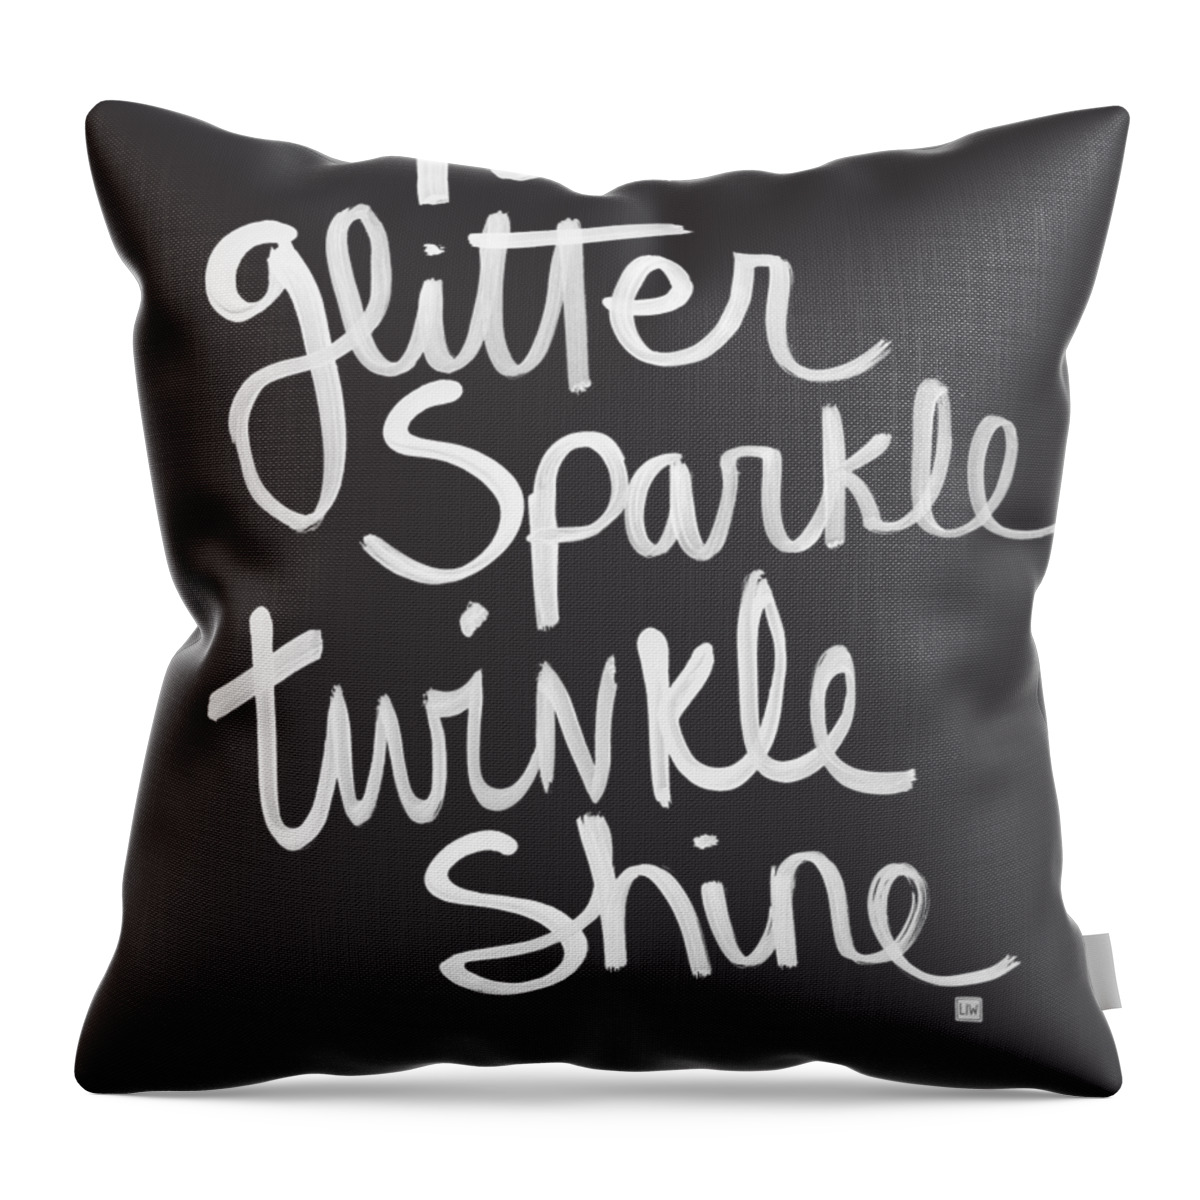 Glitter Throw Pillow featuring the mixed media Glitter Sparkle Twinkle by Linda Woods